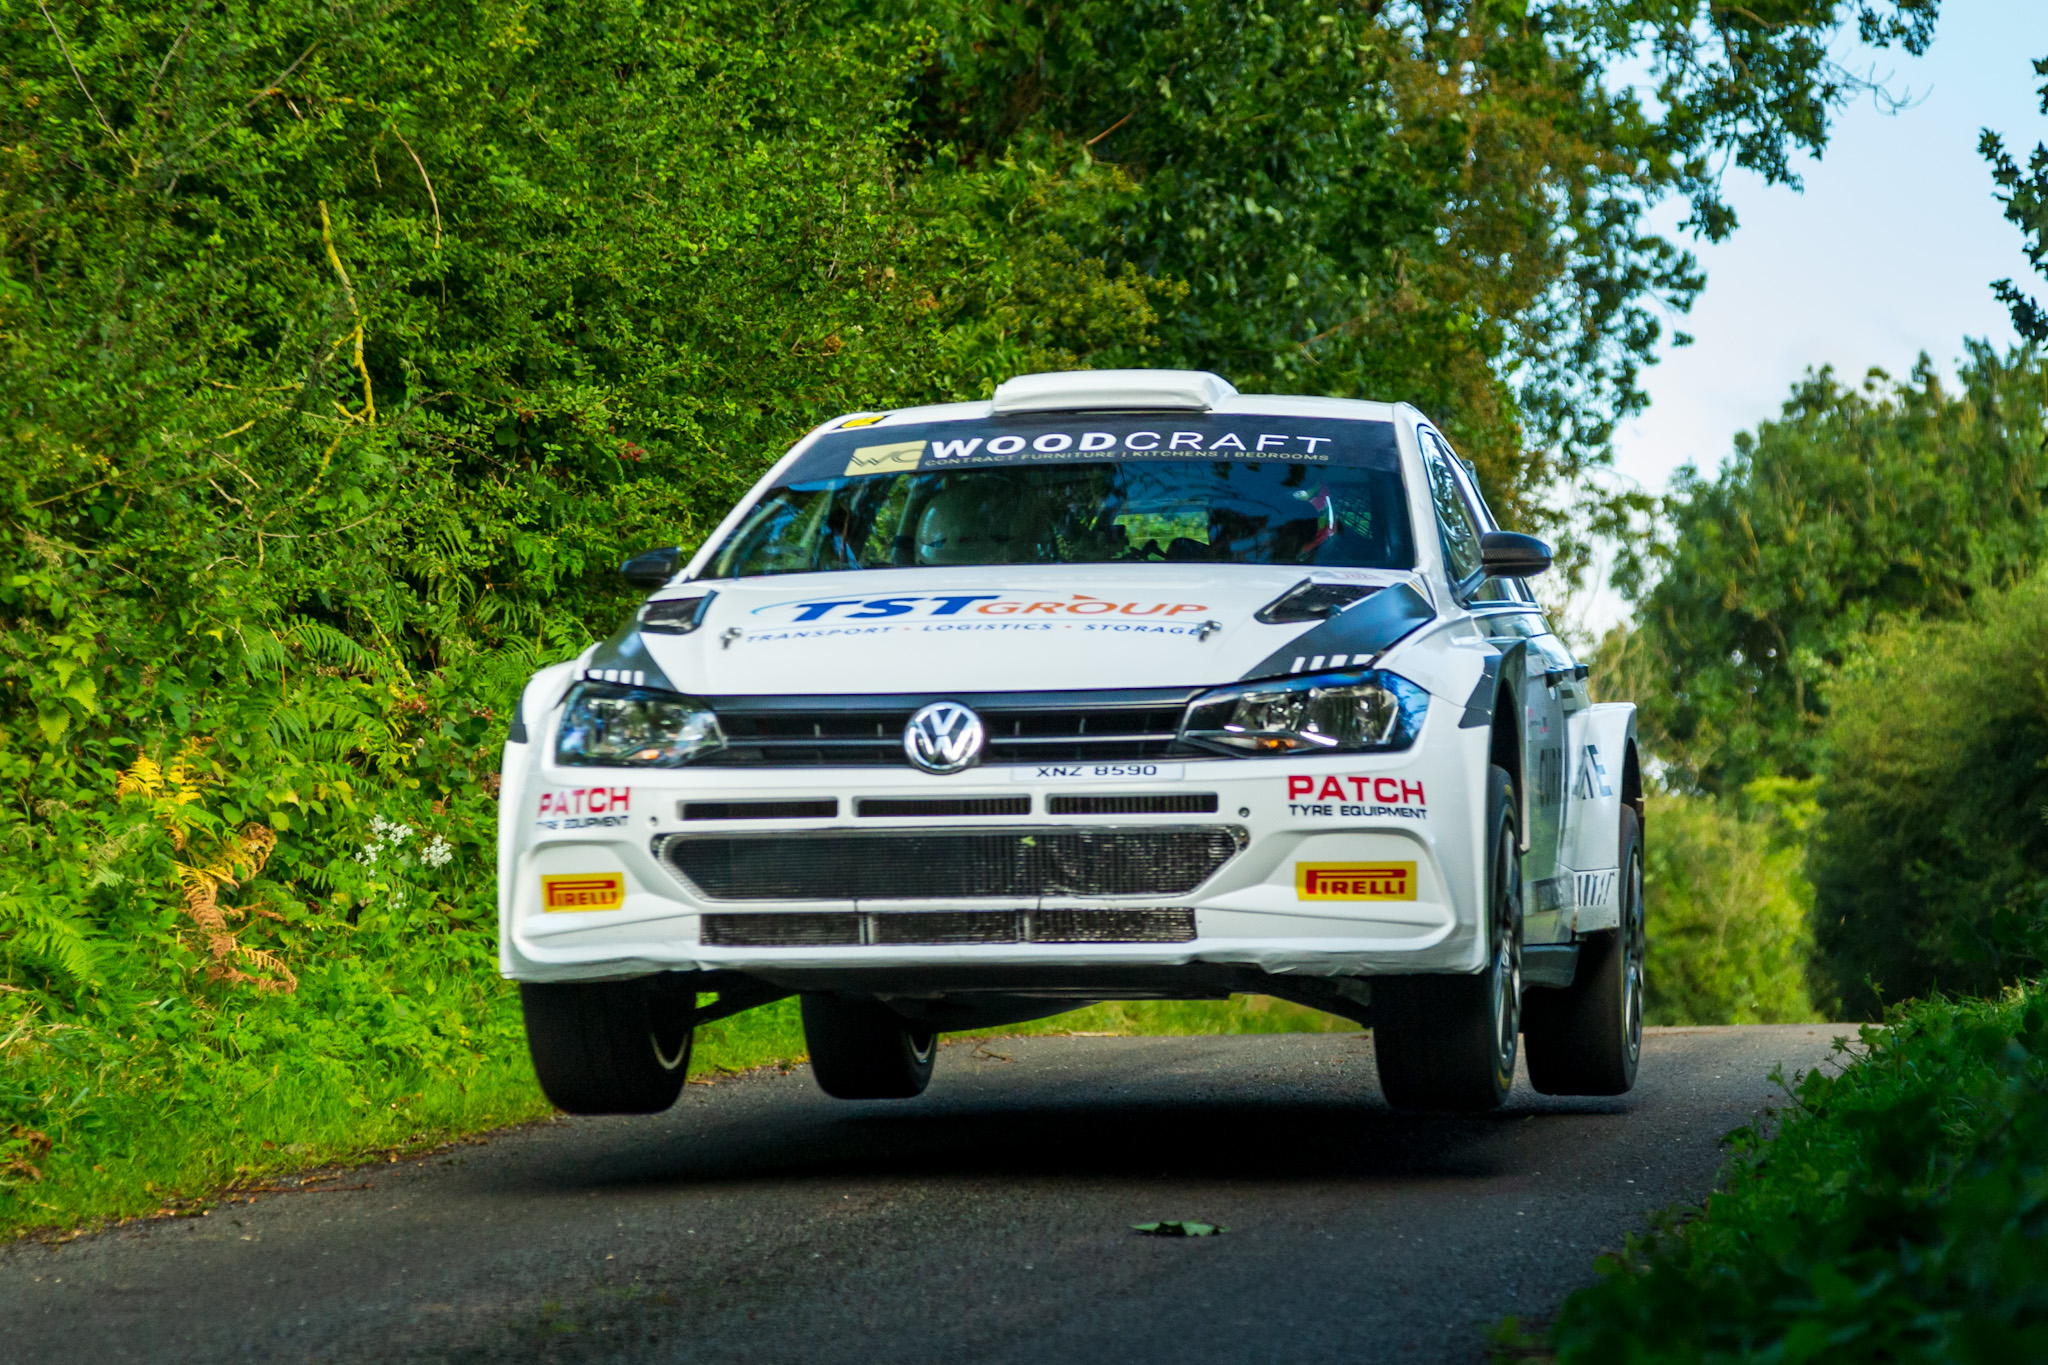 TOP TALENT HEADED FOR ULSTER RALLY